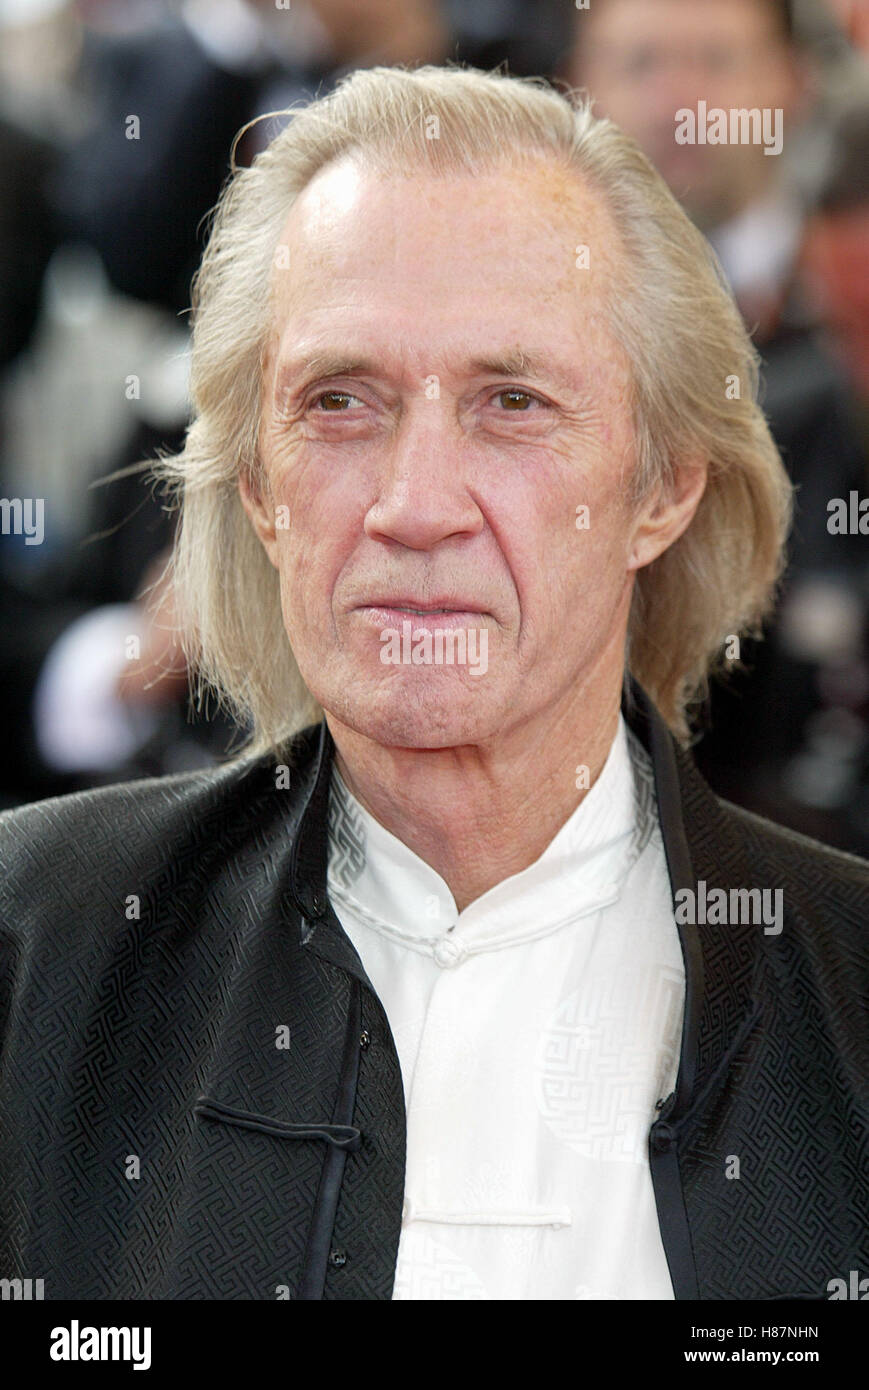 DAVID CARRADINE CANNES FILM FESTIVAL CANNES FRANCE 19 May 2003 Stock Photo